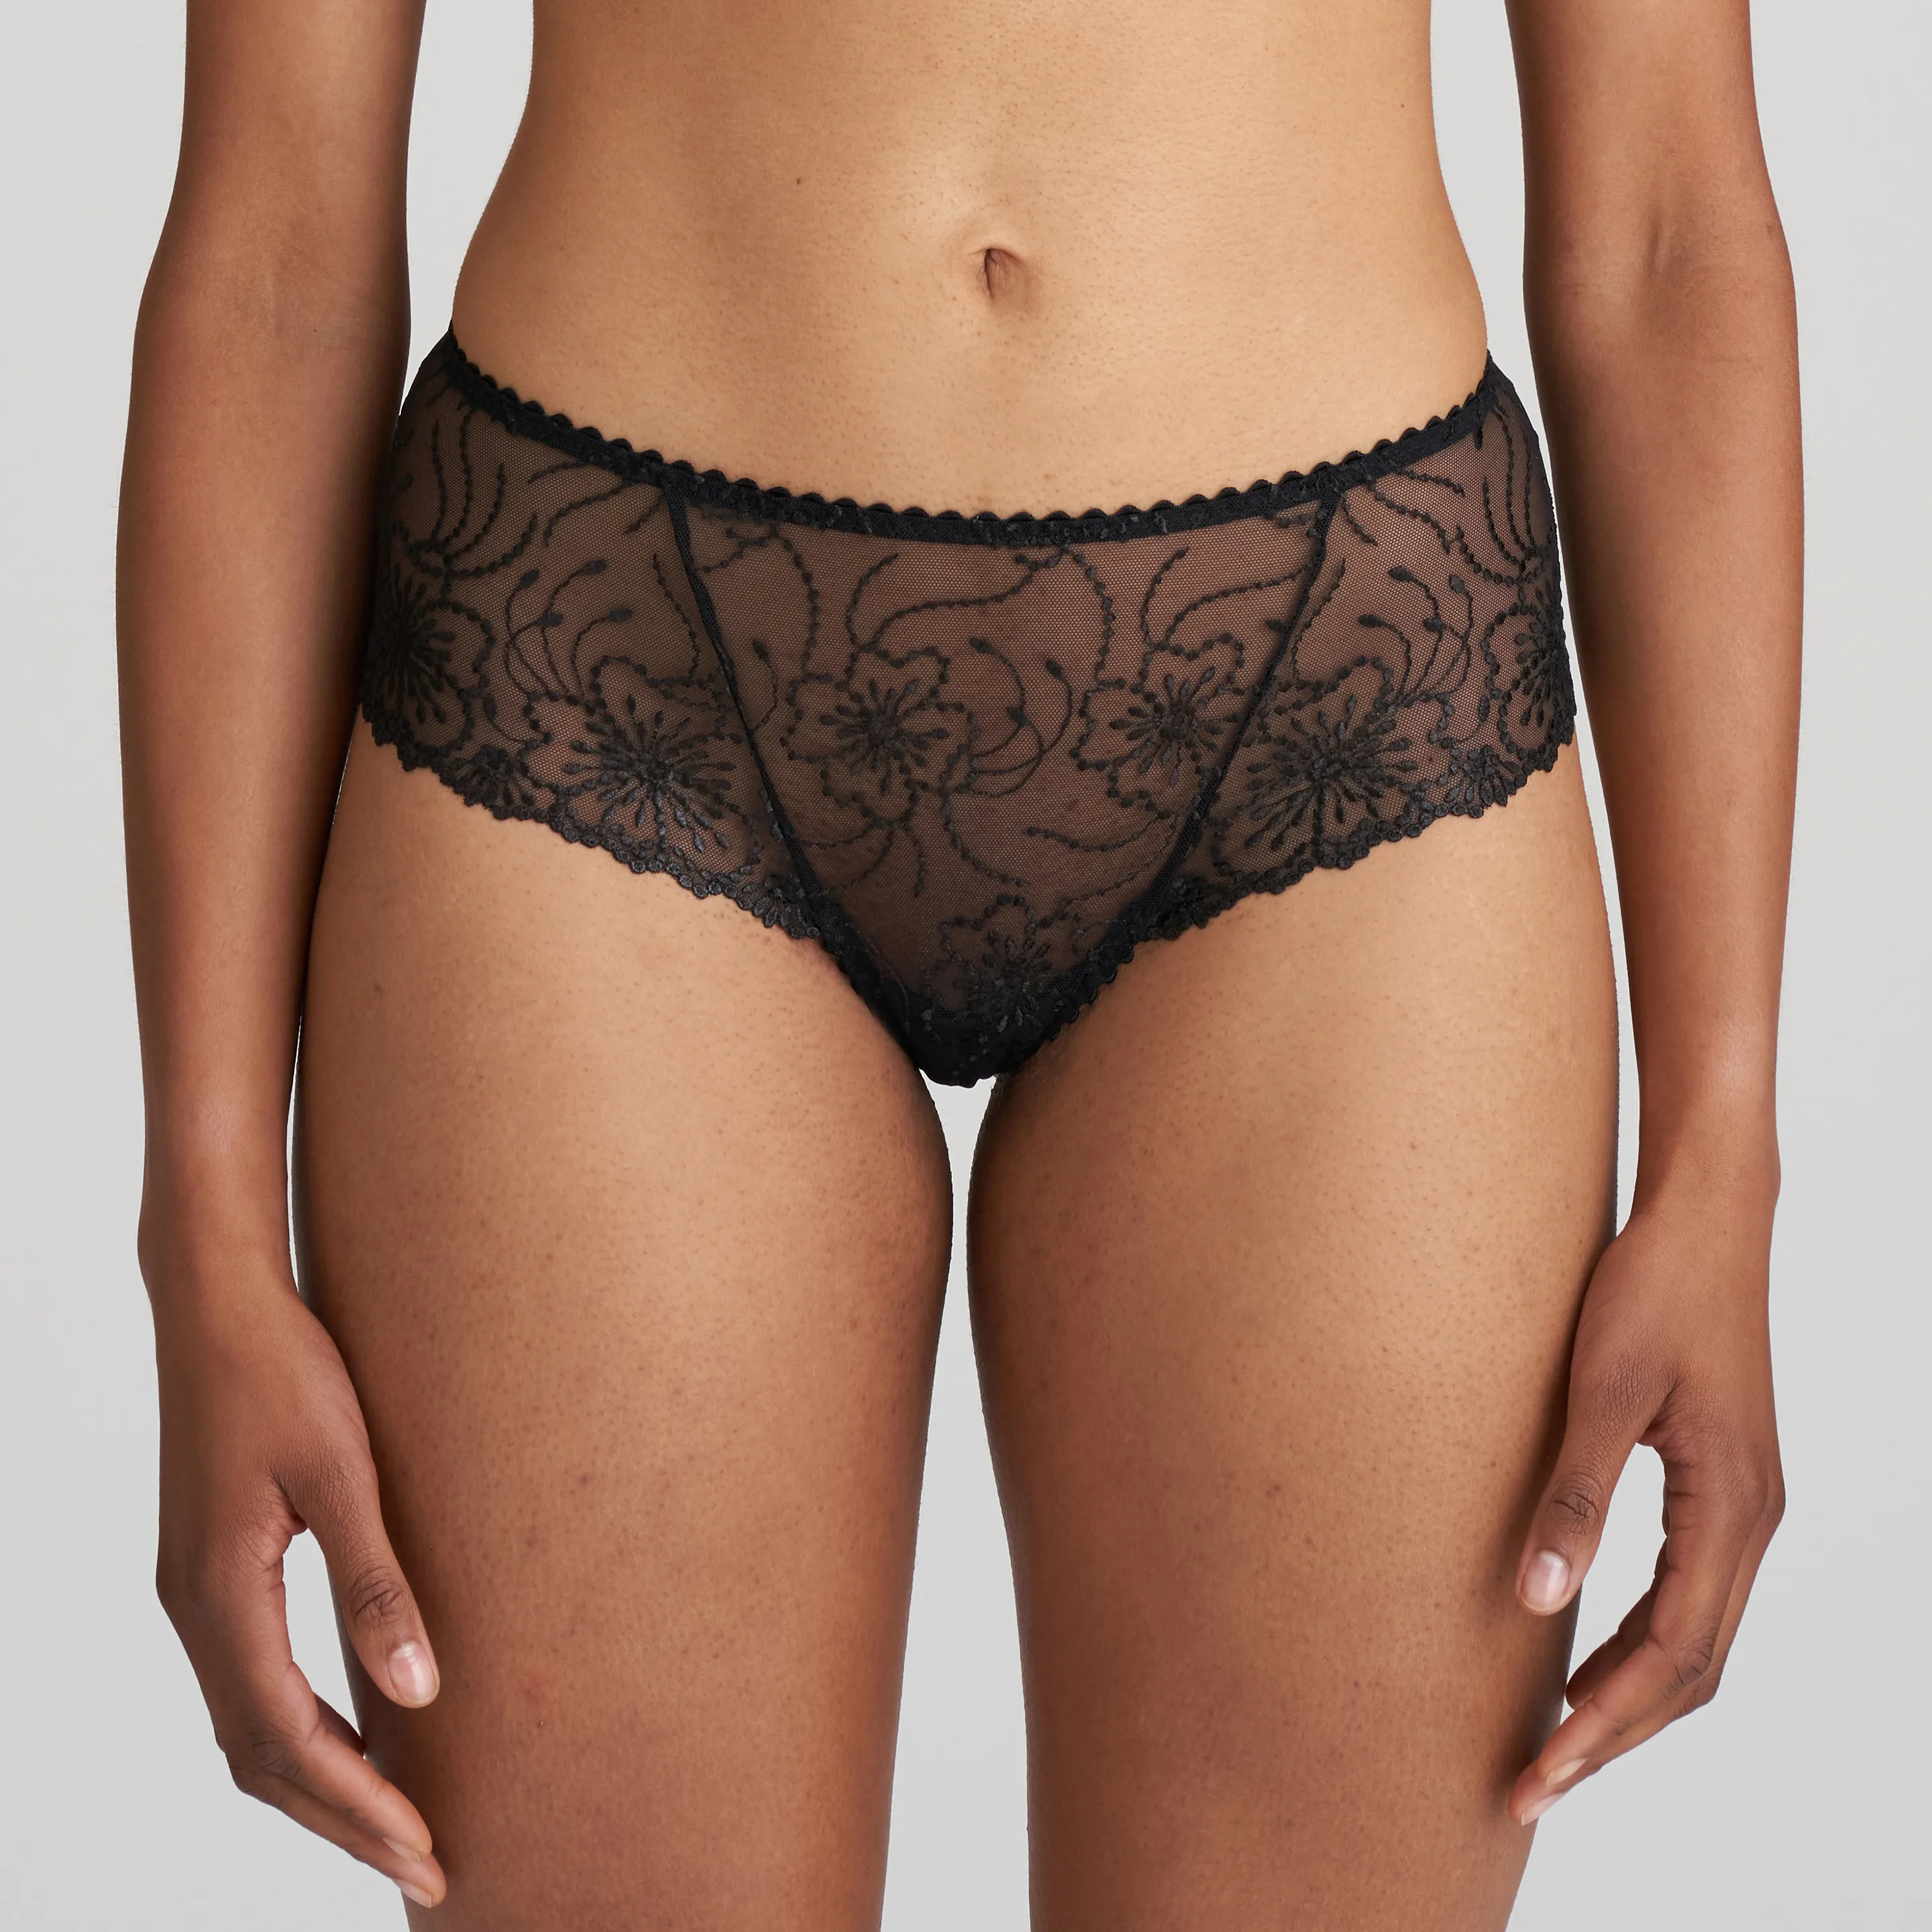 Low-rise knickers  A luxury selection of designer underwear